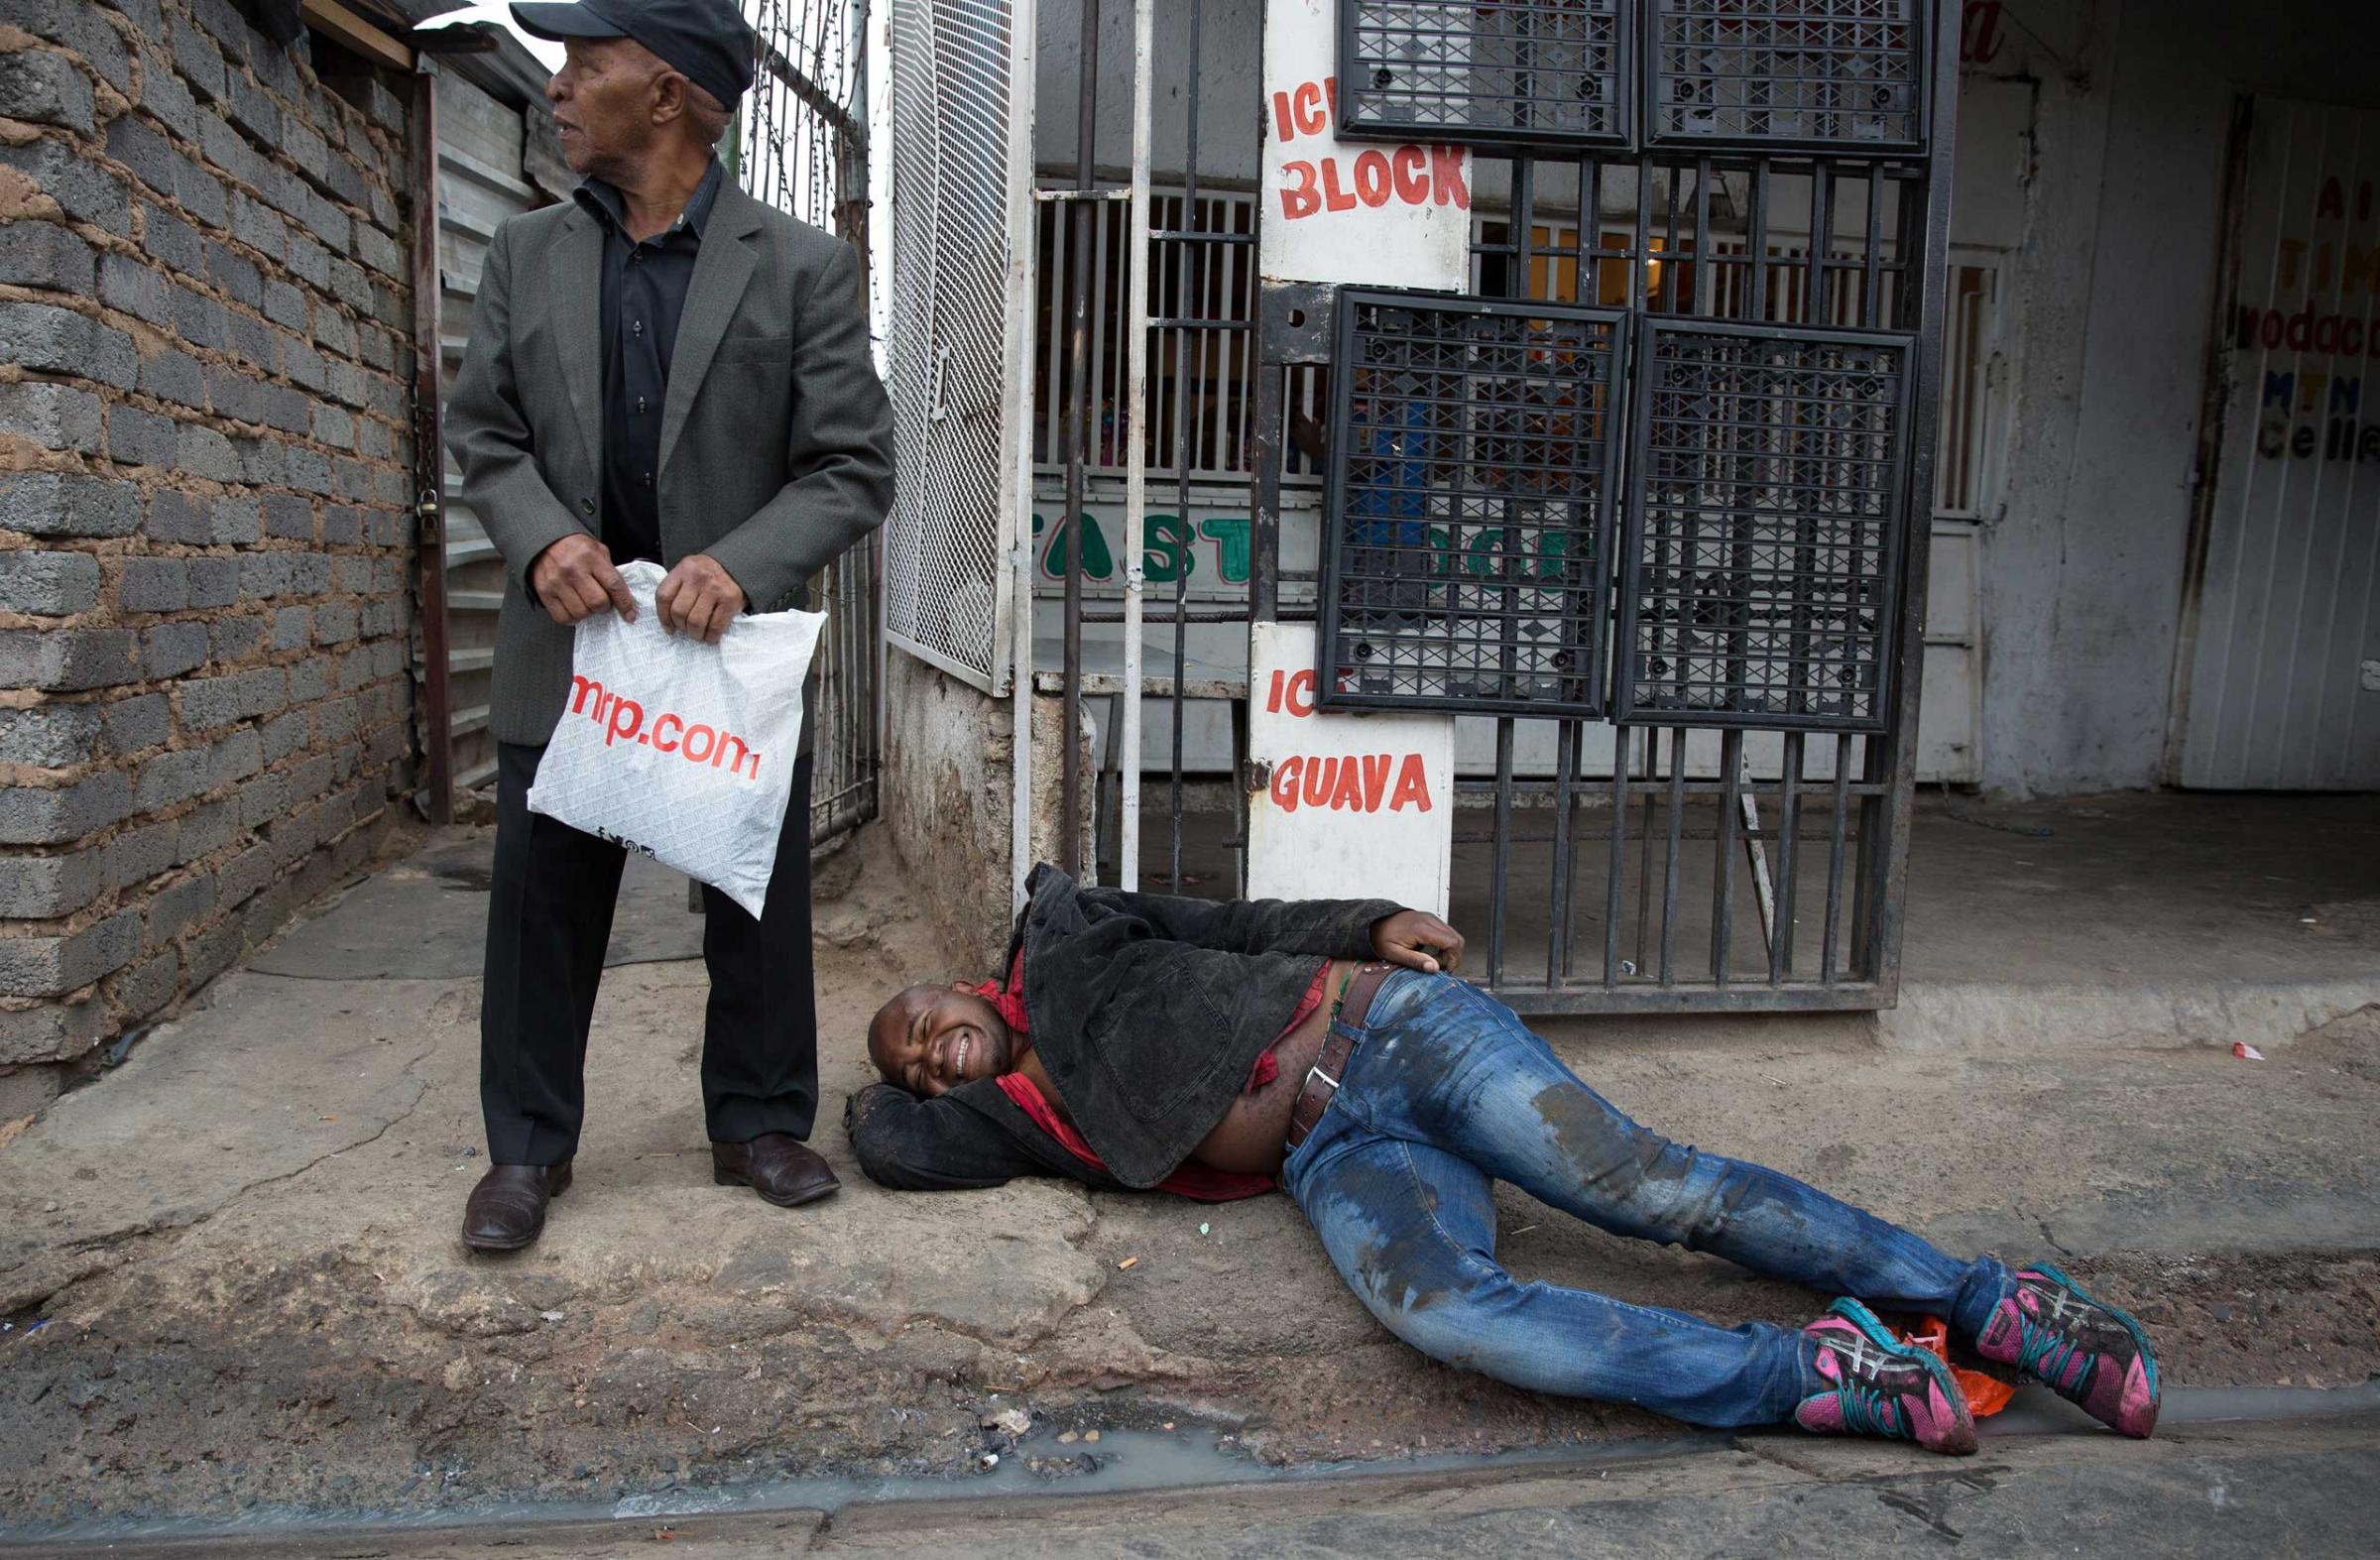 Sithole after being attacked by men in Alexandra township during anti-immigrant violence in Johannesburg on April 18, 2015. He later died of his injuries.